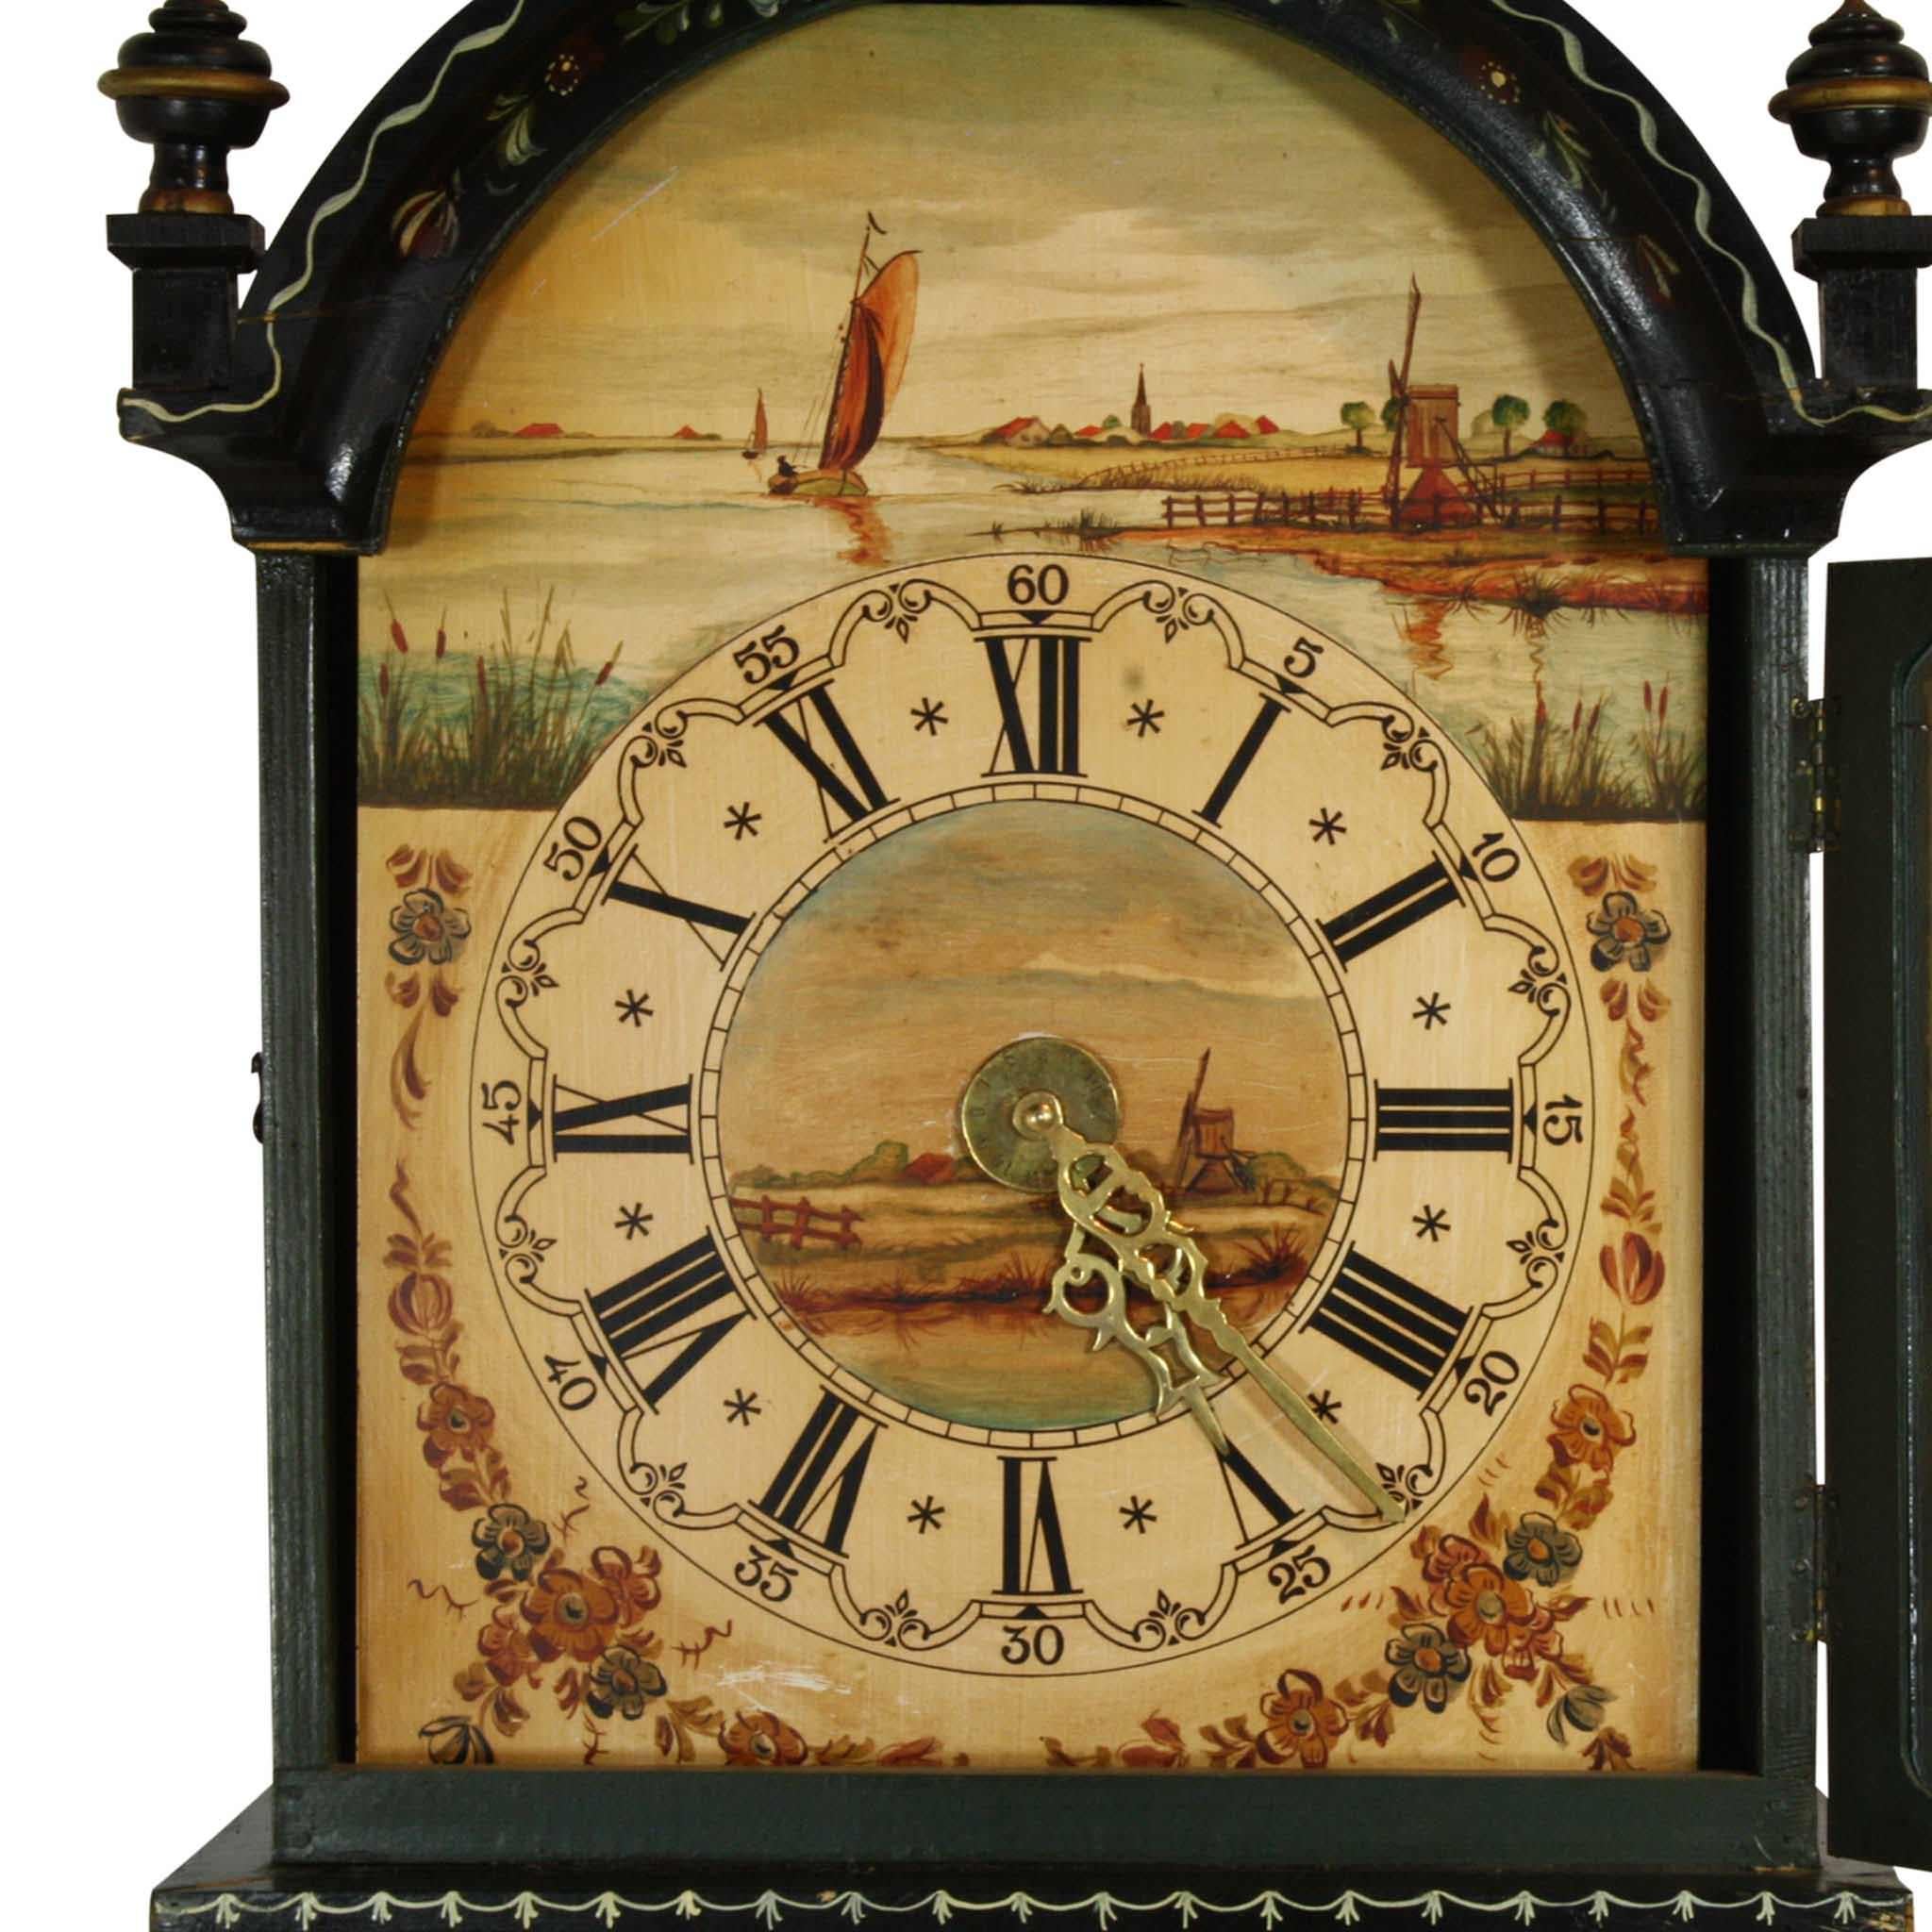 Tall case clocks like this one are often referred to as grandmother clocks because they are shorter than grandfather clocks. Hand-painted in Holland in traditional, Folk Art style, the clock features foliage, flowers, and birds. The diameter of the